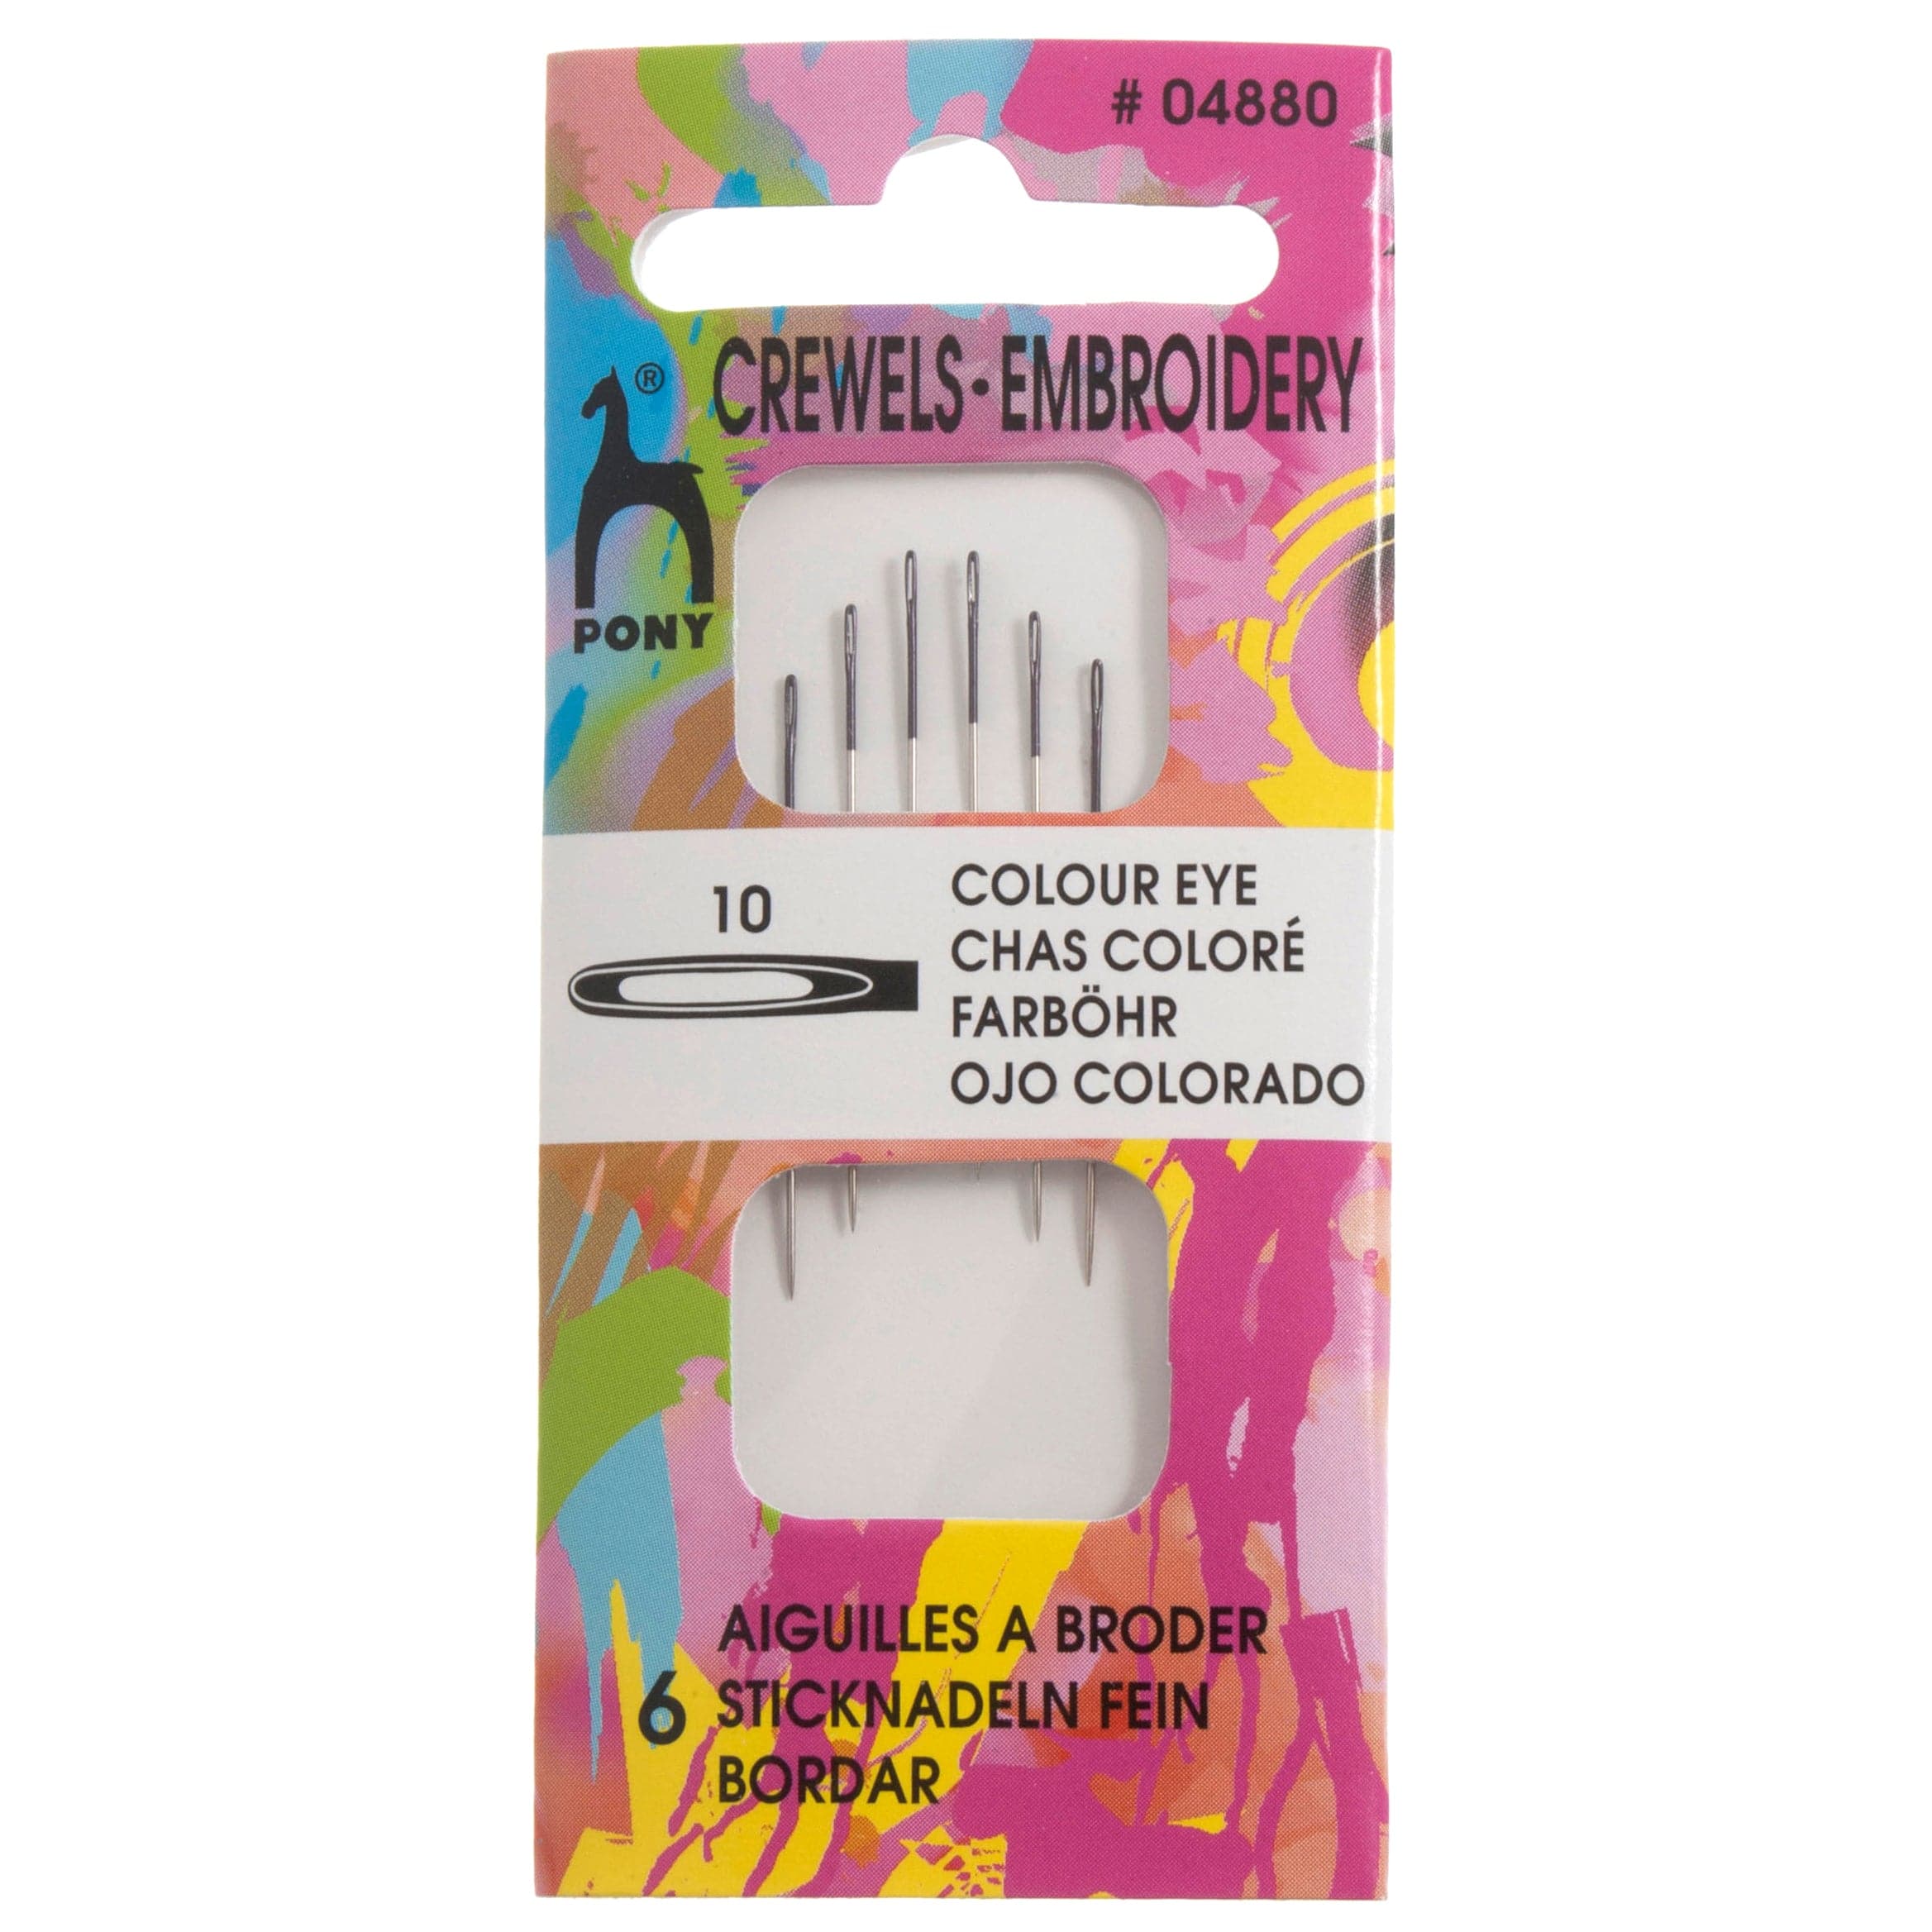 Pony Accessories Pony Pack of 5 Crewel Needles with Colour-Coded Eye (Size 10) 8901003048803